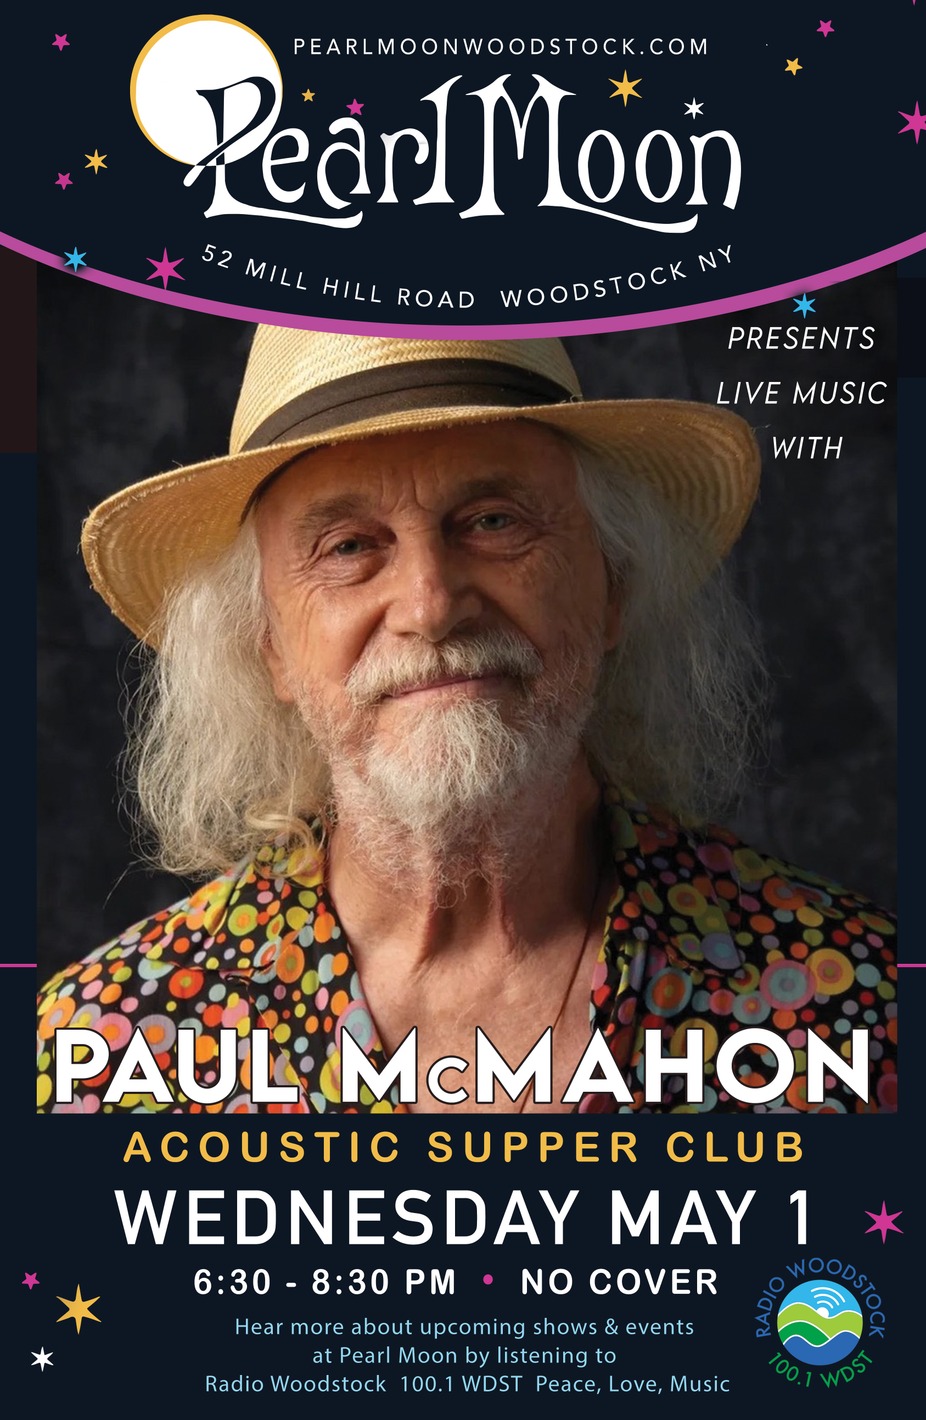 ACOUSTIC SUPPER CLUB with PAUL McMAHON at PEARL MOON WOODSTOCK event photo